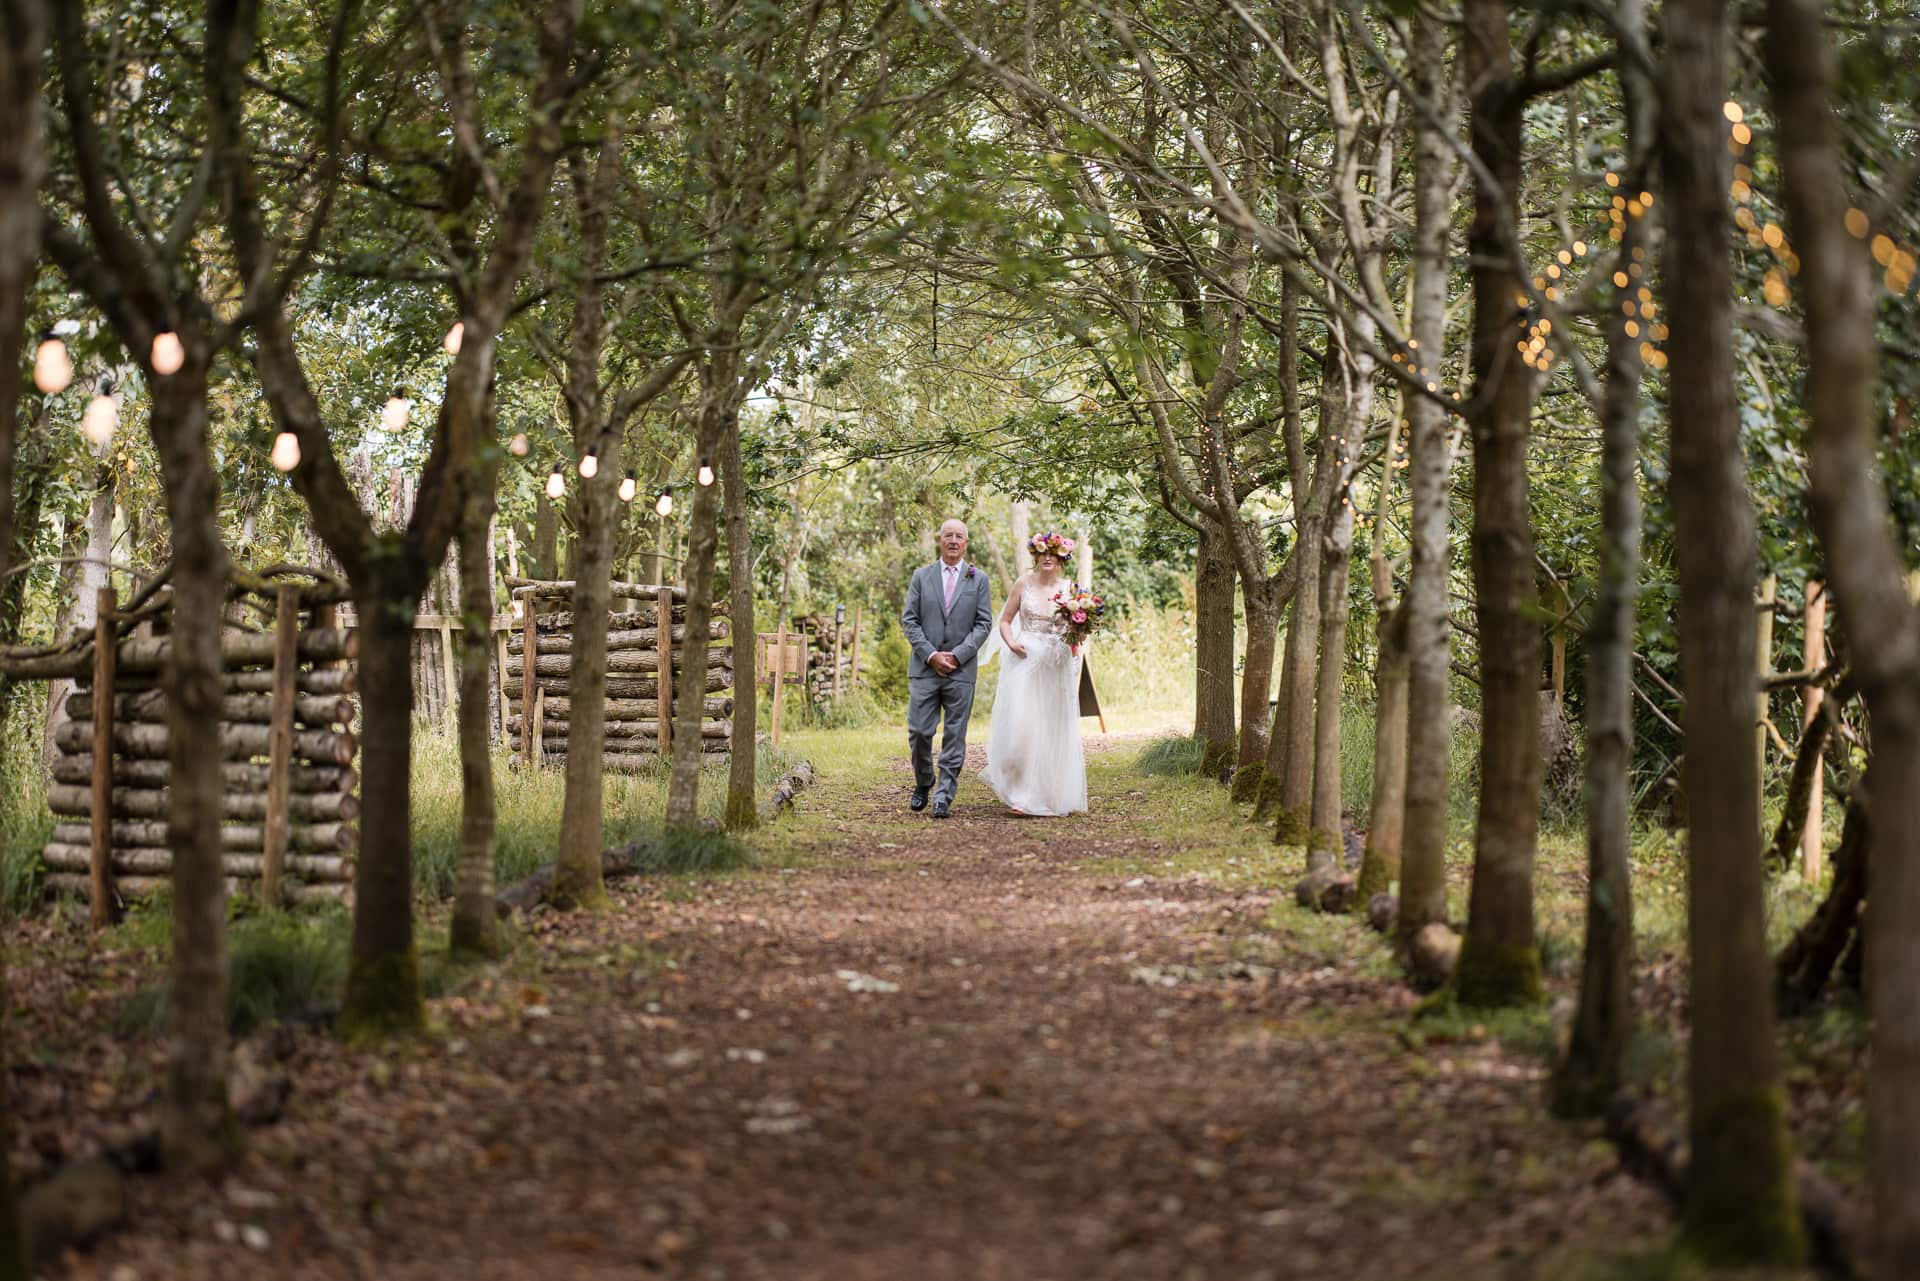 Bride and Father about to walk down a wood lined avenue at the outdoor woodland wedding.